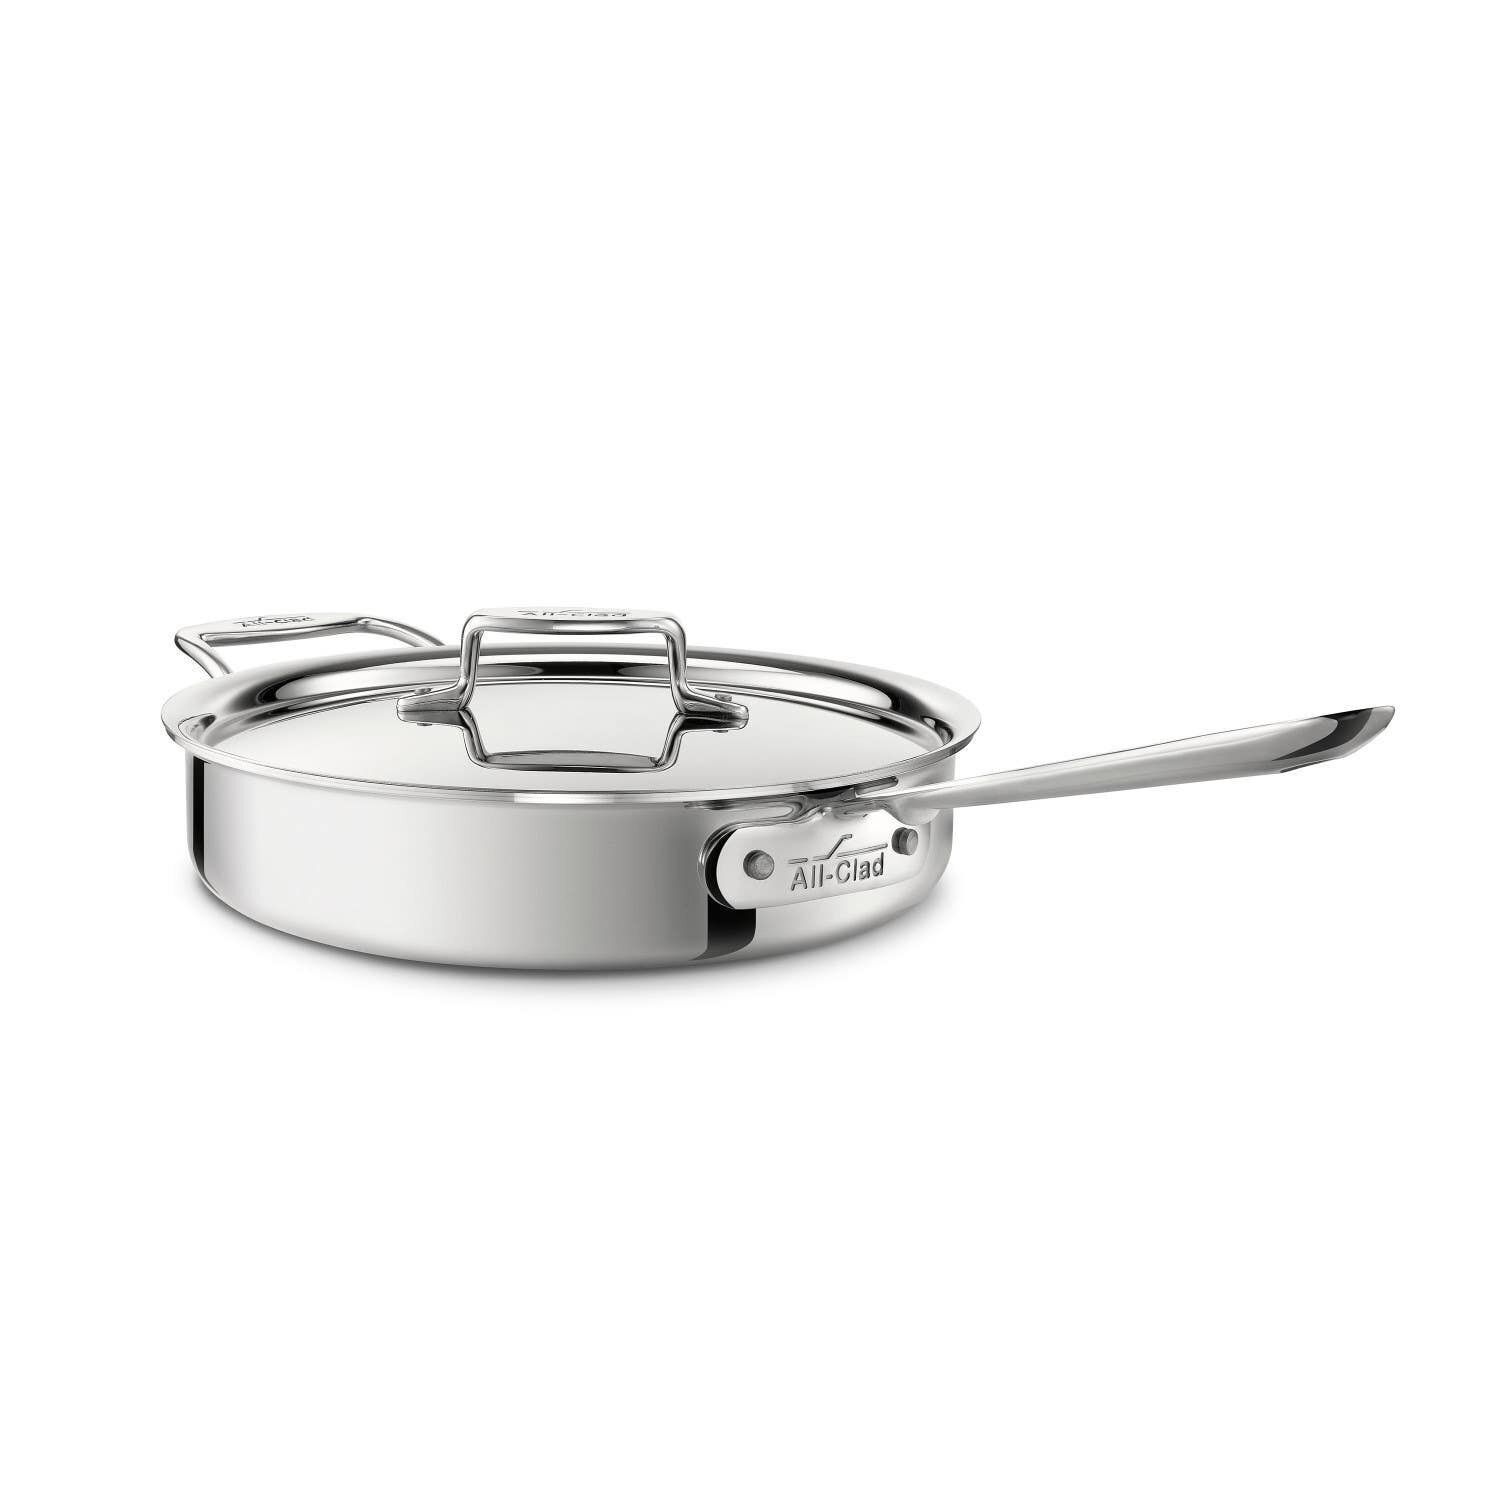 D5 Stainless Polished 5-ply Bonded Cookware, Nonstick Essential